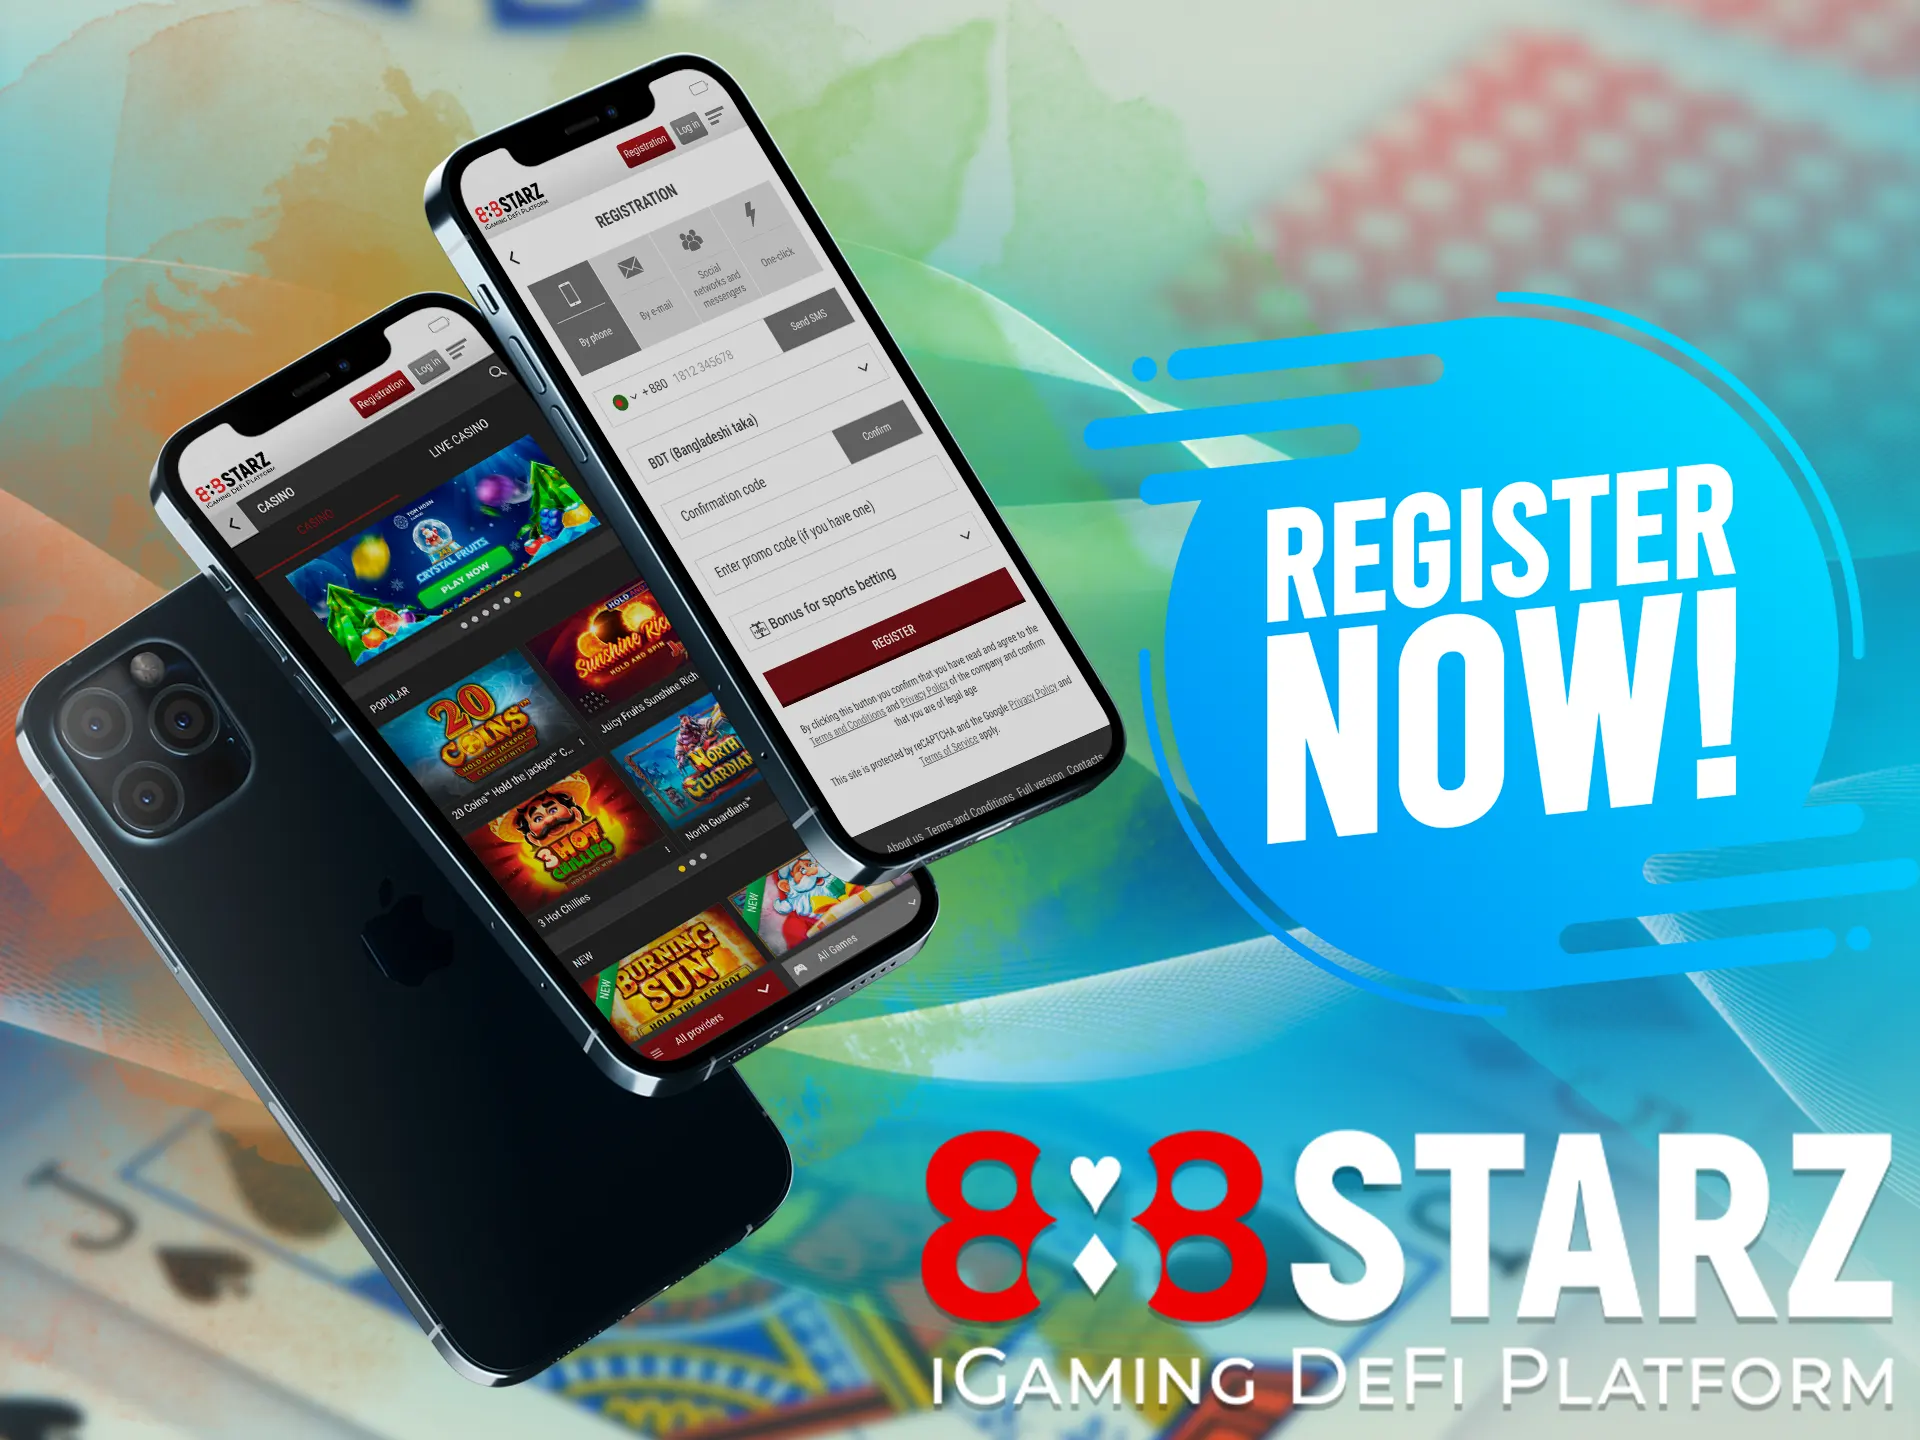 In order to start betting or playing in the casino, you need to create a 888starz account, if you have one - just log in there.